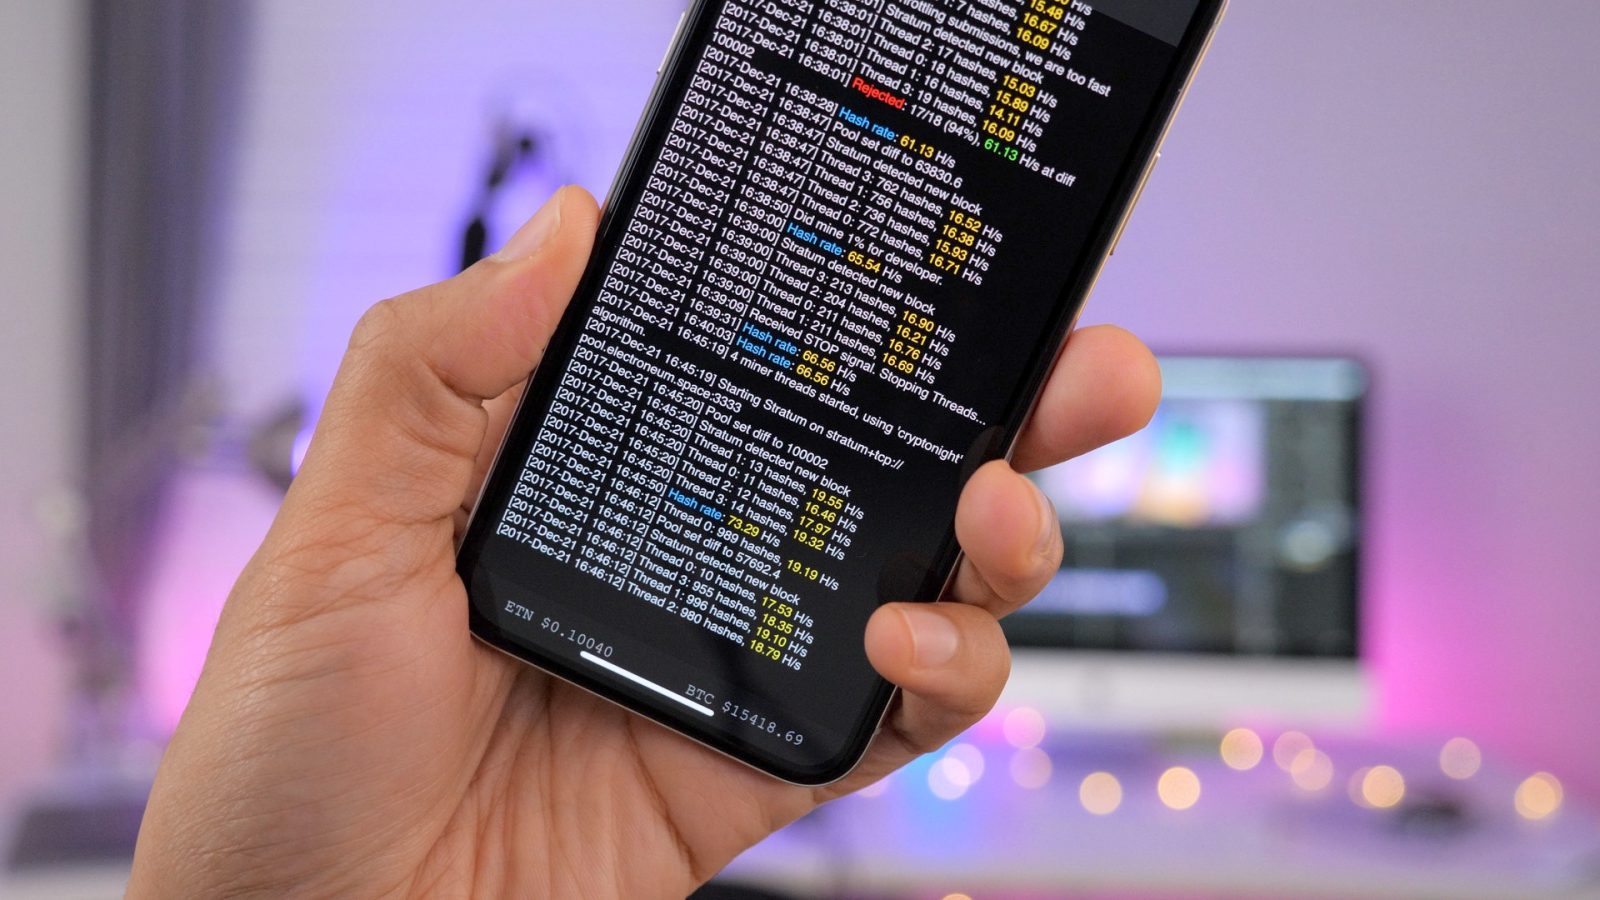 Hands-on: MobileMiner - how to mine cryptocurrency on an iPhone [Video] -  9to5Mac